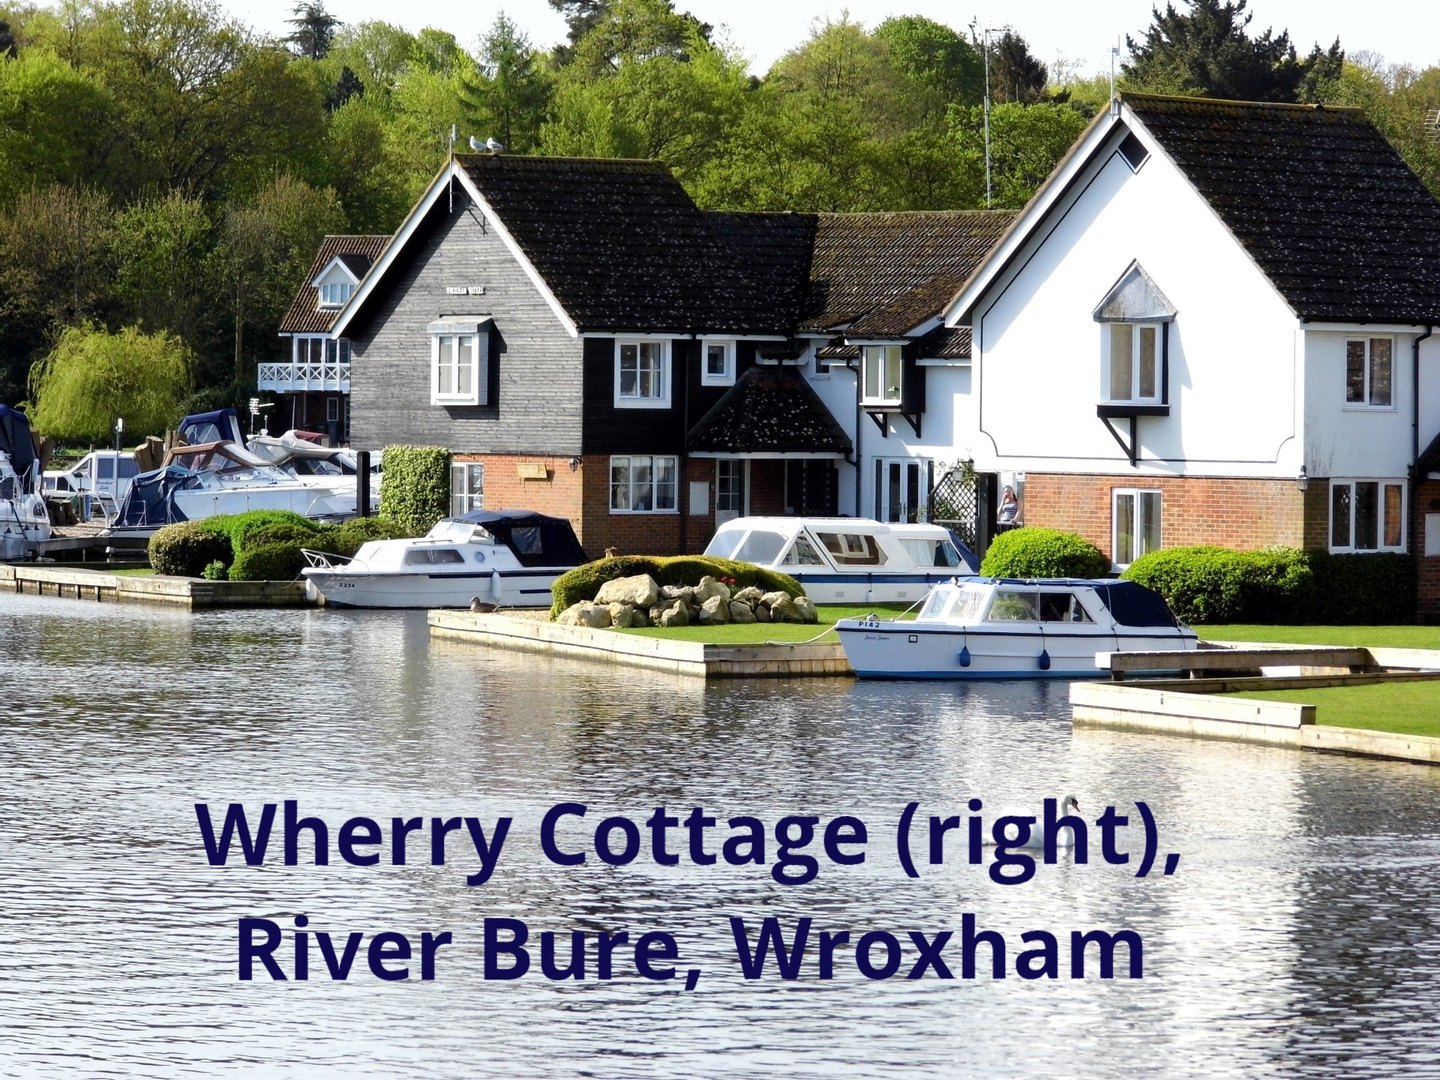 Wherry Cottage on River Bure as seen from Wroxham Bridge